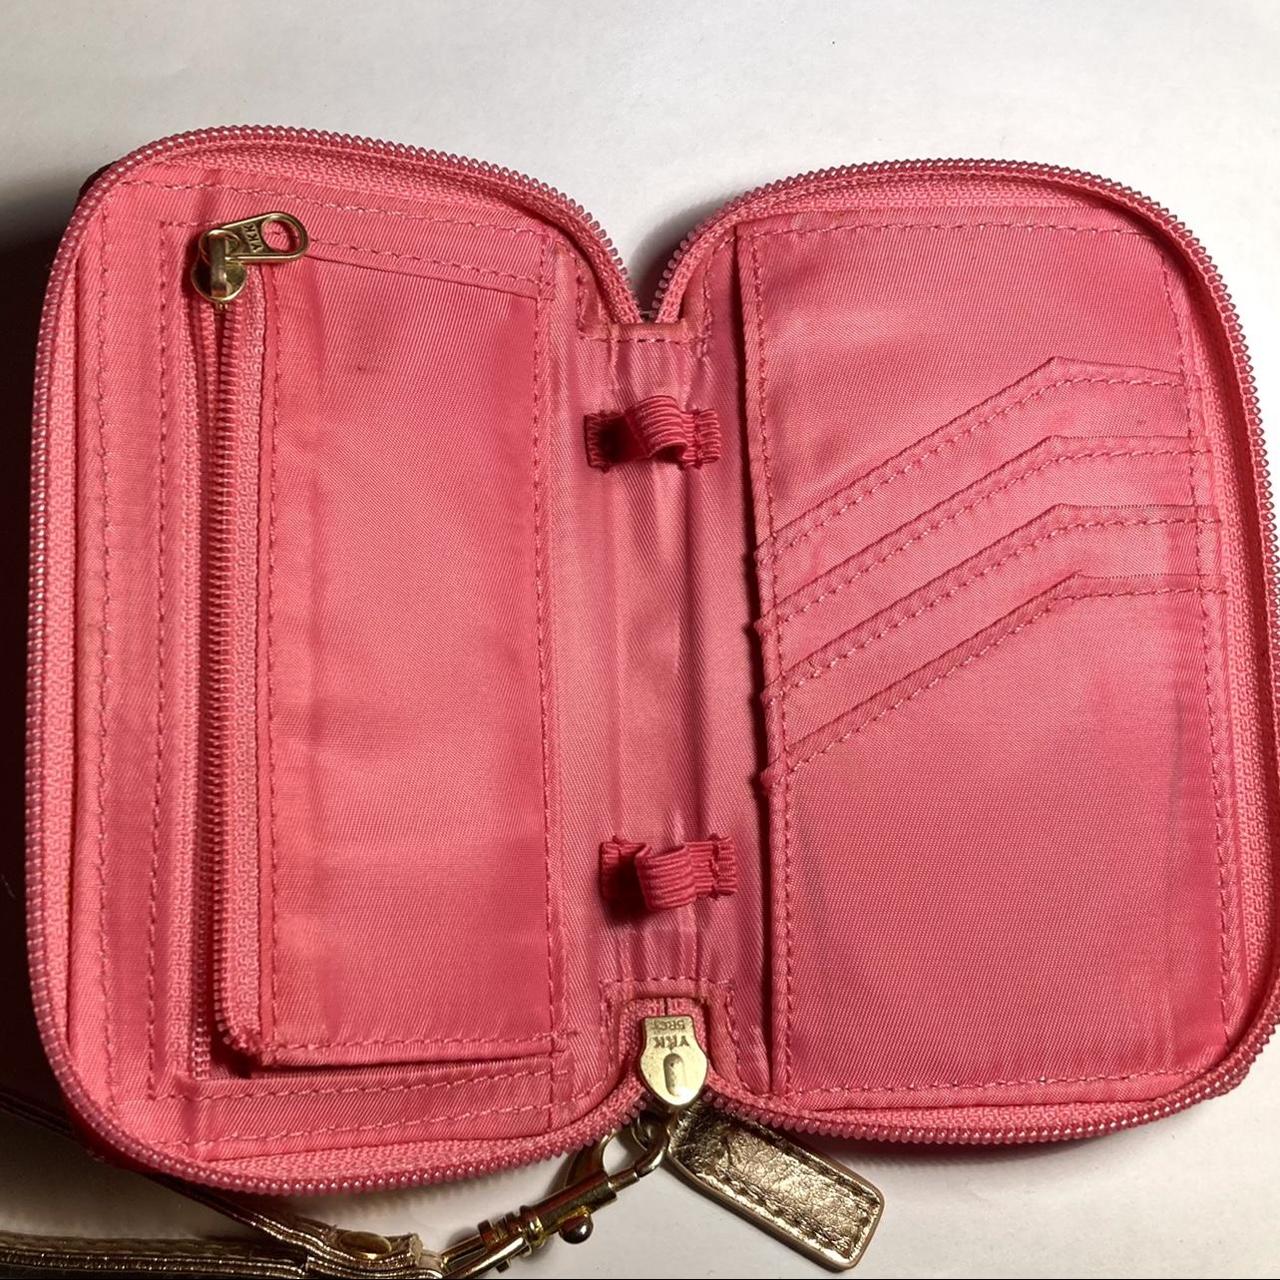 Lilly Pulitzer Women's Pink and Gold Wallet-purses (3)